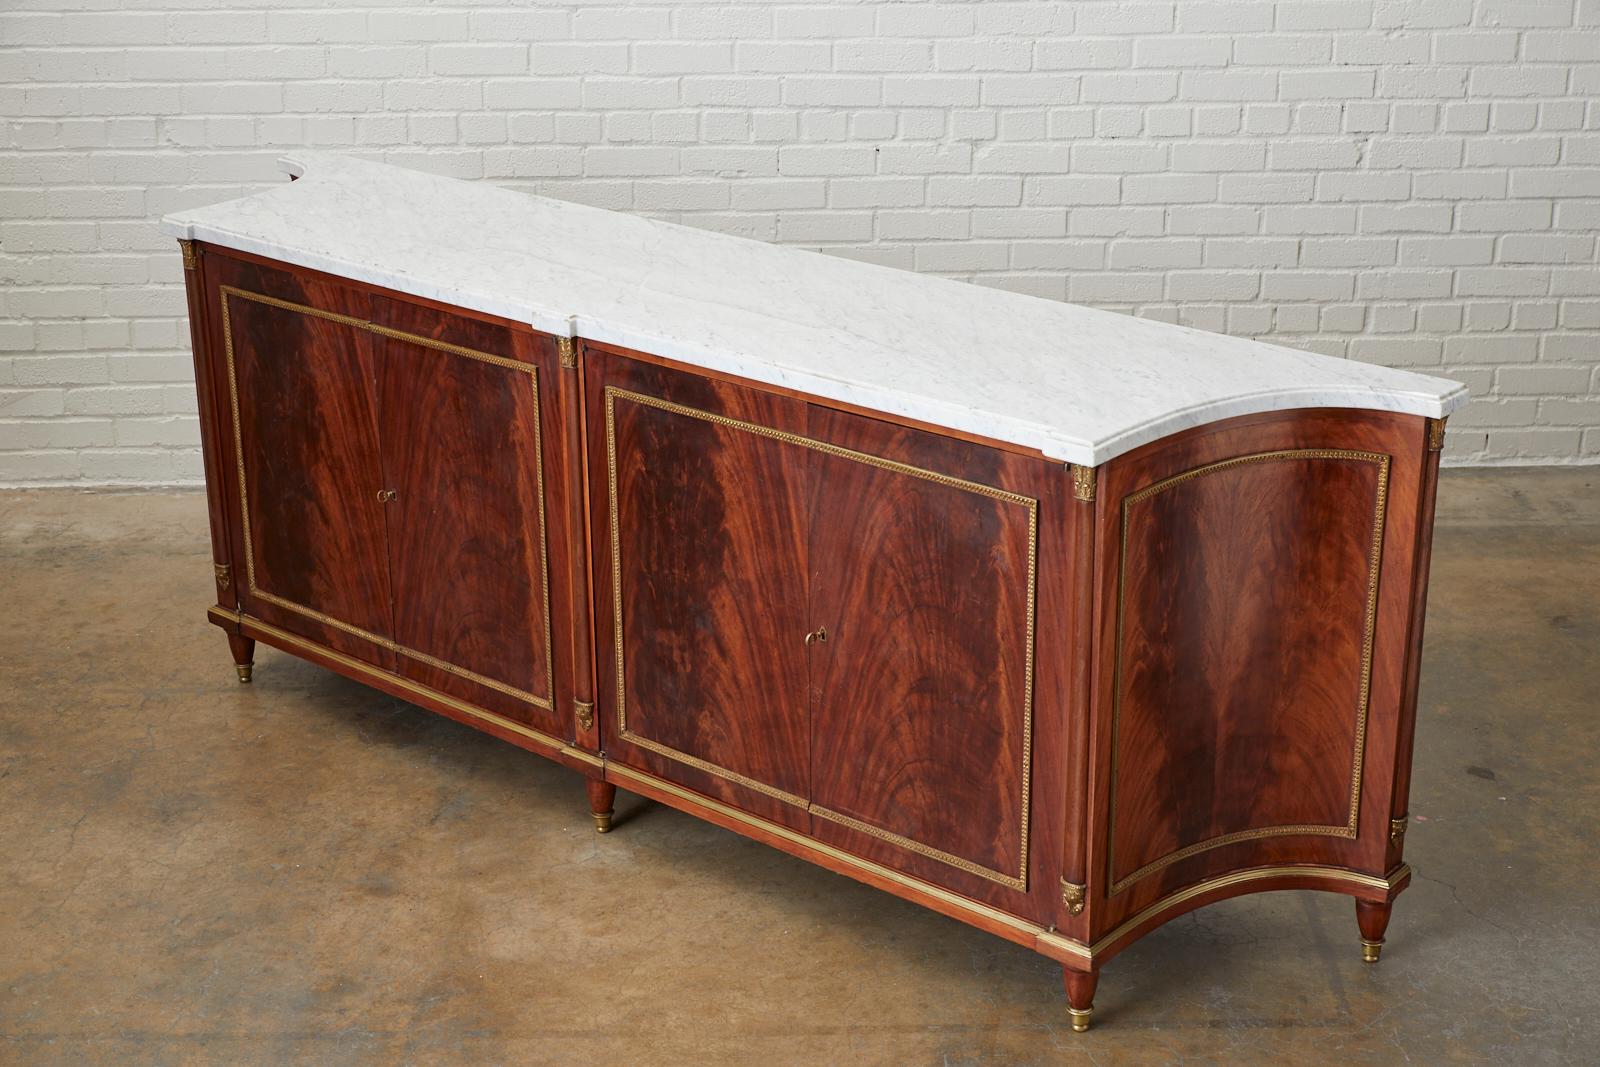 Grand Directoire style mahogany and marble sideboard server in the style of Maison Jansen. This monumental sideboard features radiant crotch mahogany that is showcased on the front and sides. Embellished with bronze framing and mounts in the French